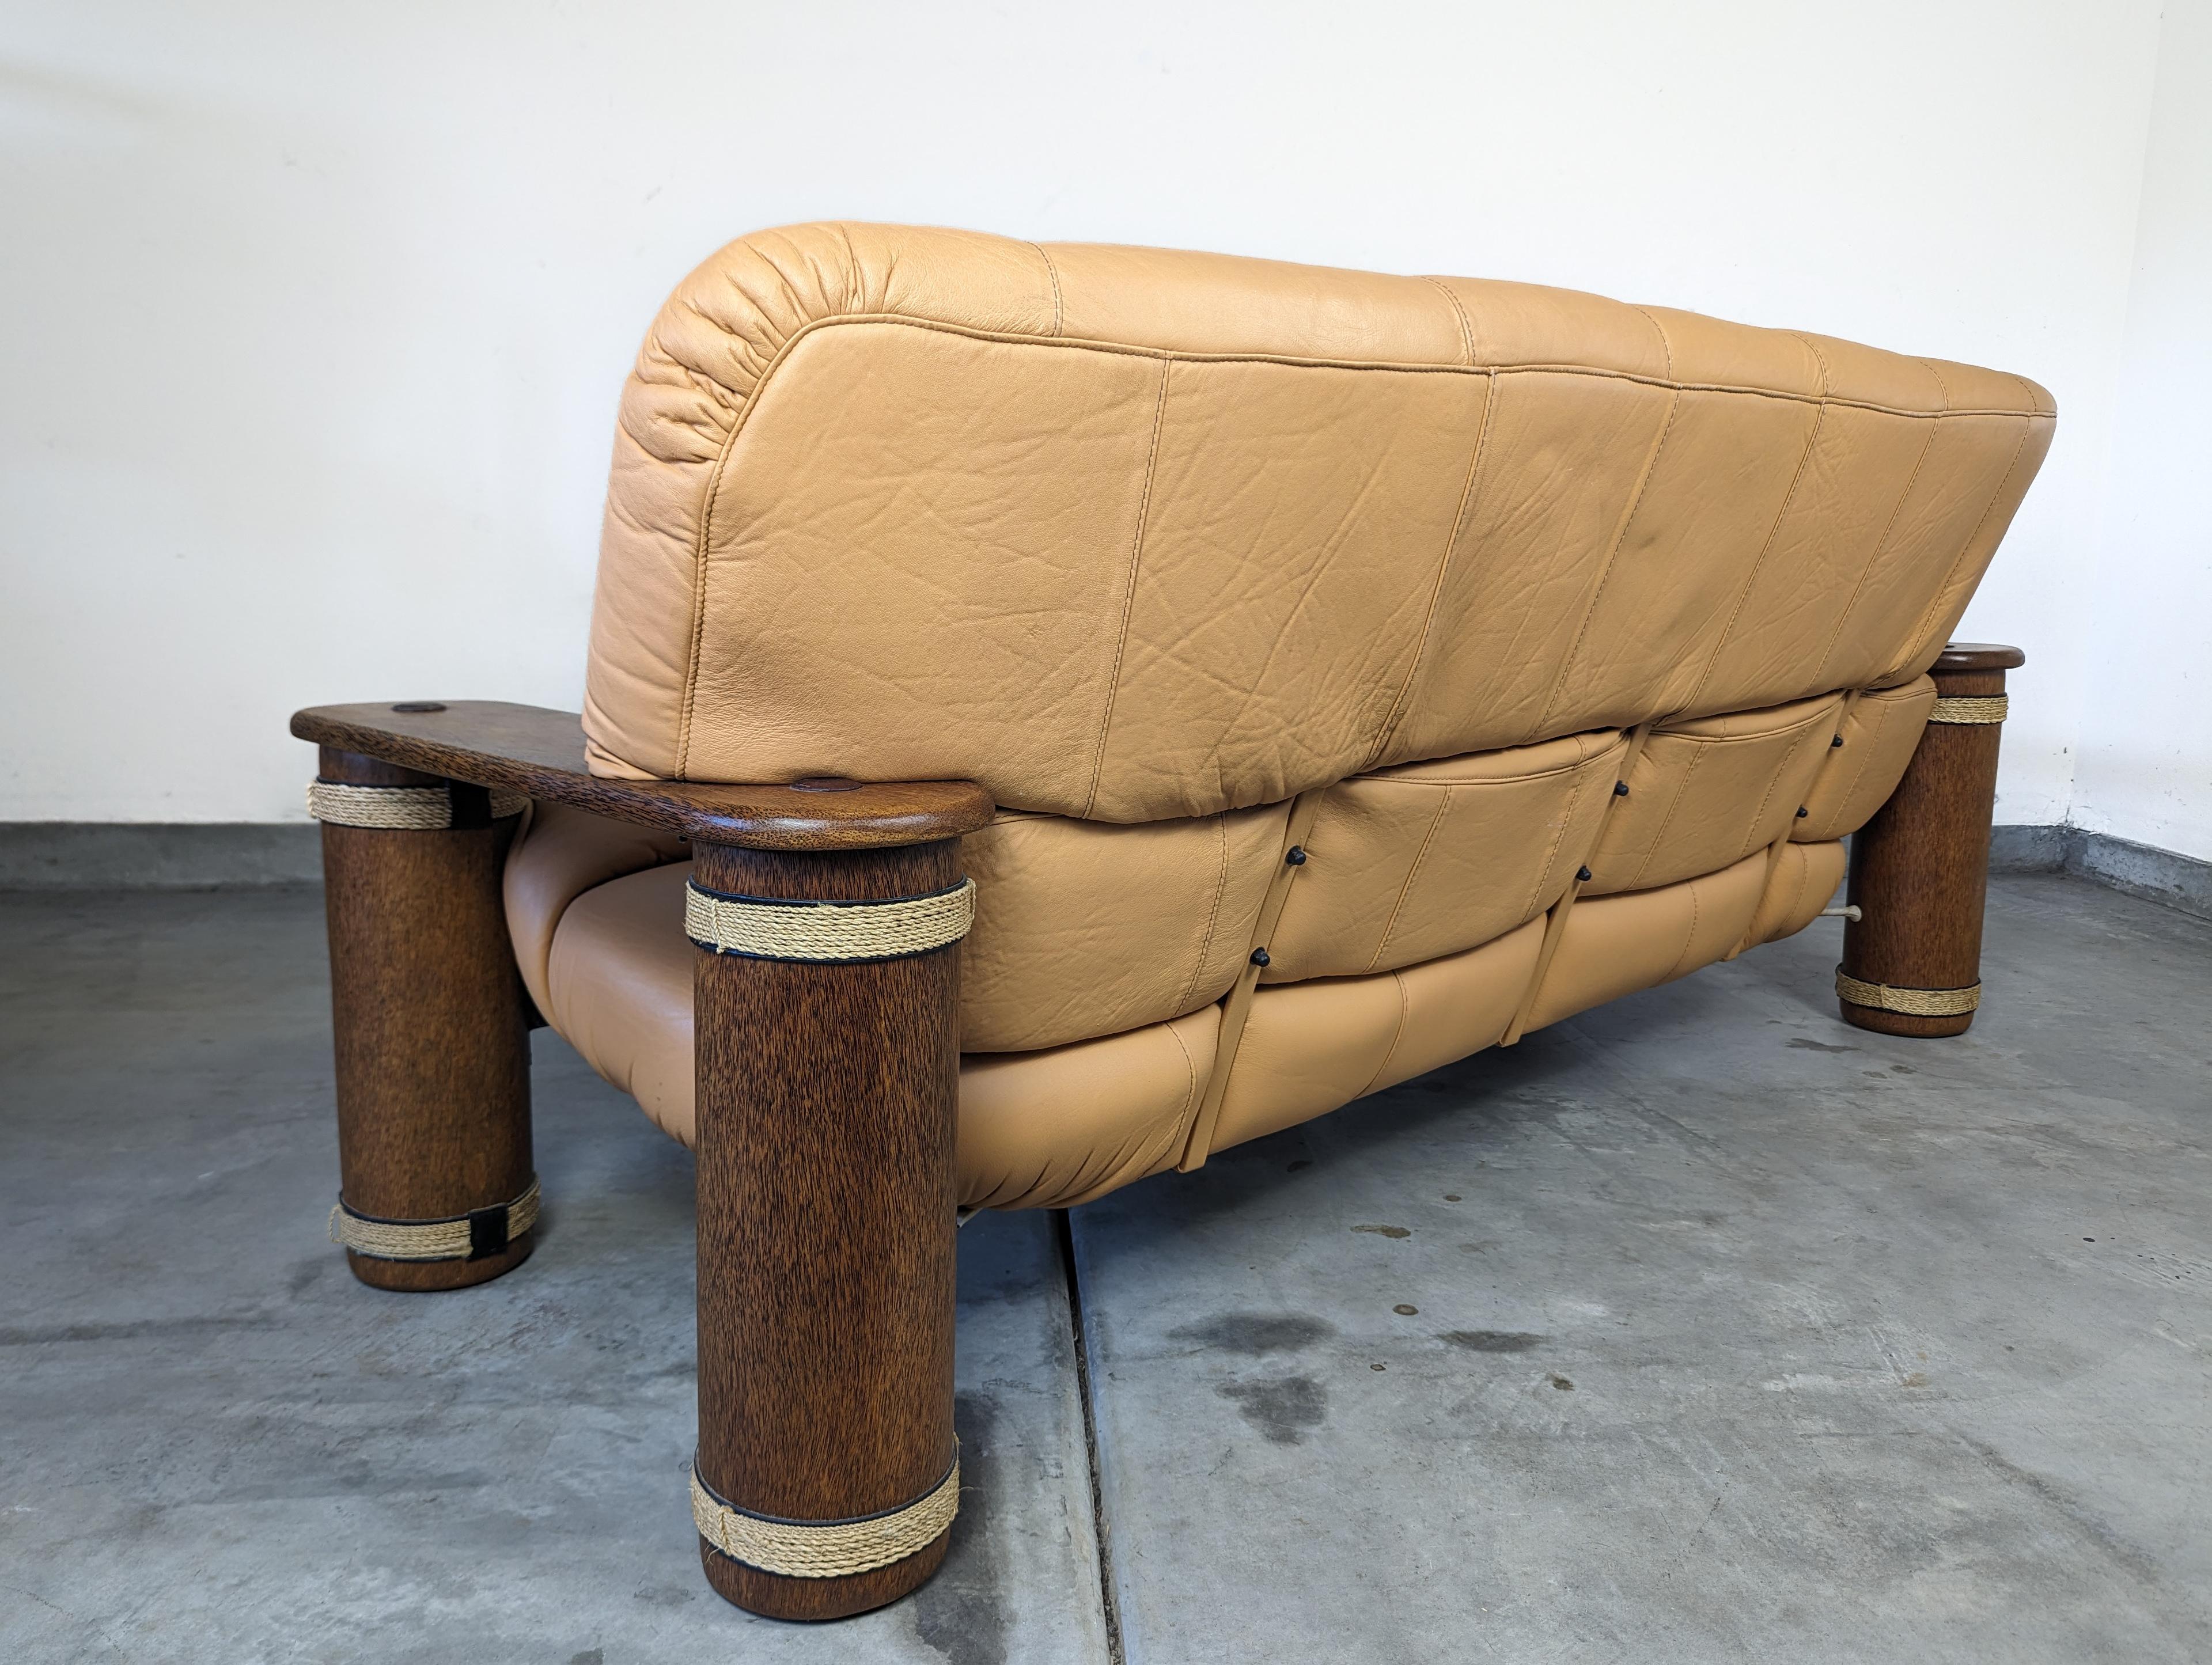 Late 20th Century Vintage Leather and Palmwood Three-Seat Sofa by Pacific Green, c1990s For Sale